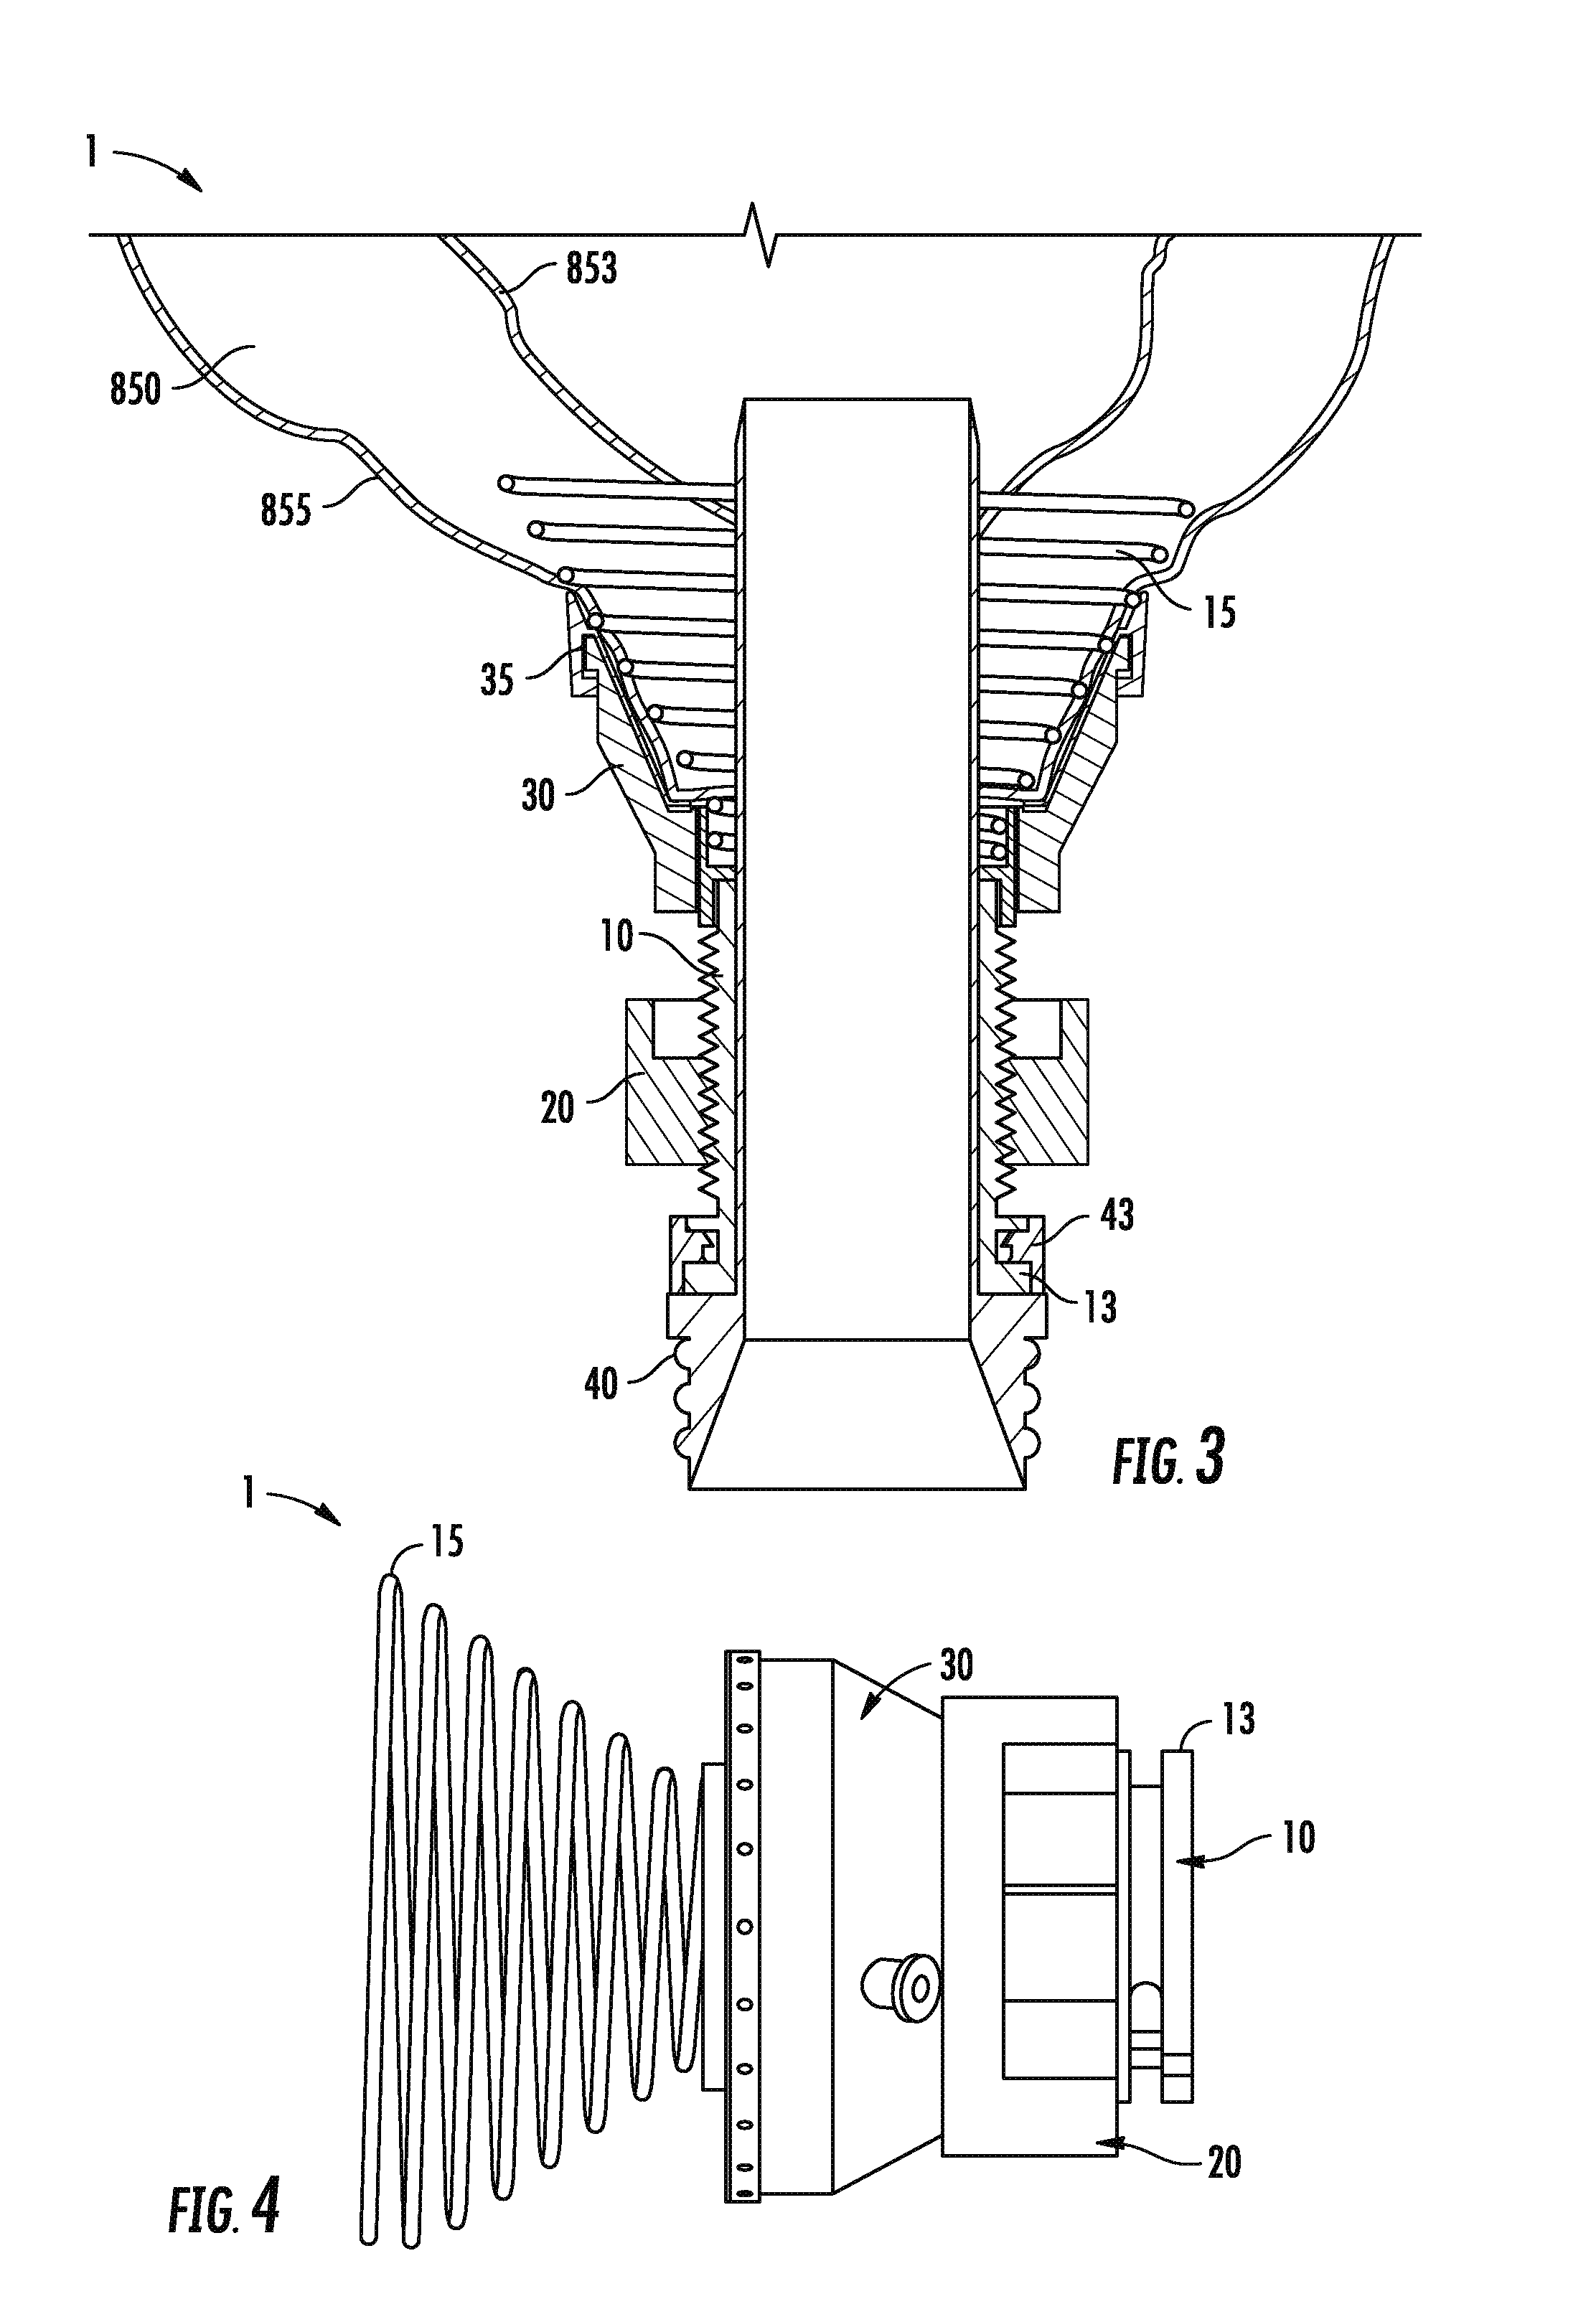 Systems and Methods for Percutaneous Access, Stabilization and Closure of Organs